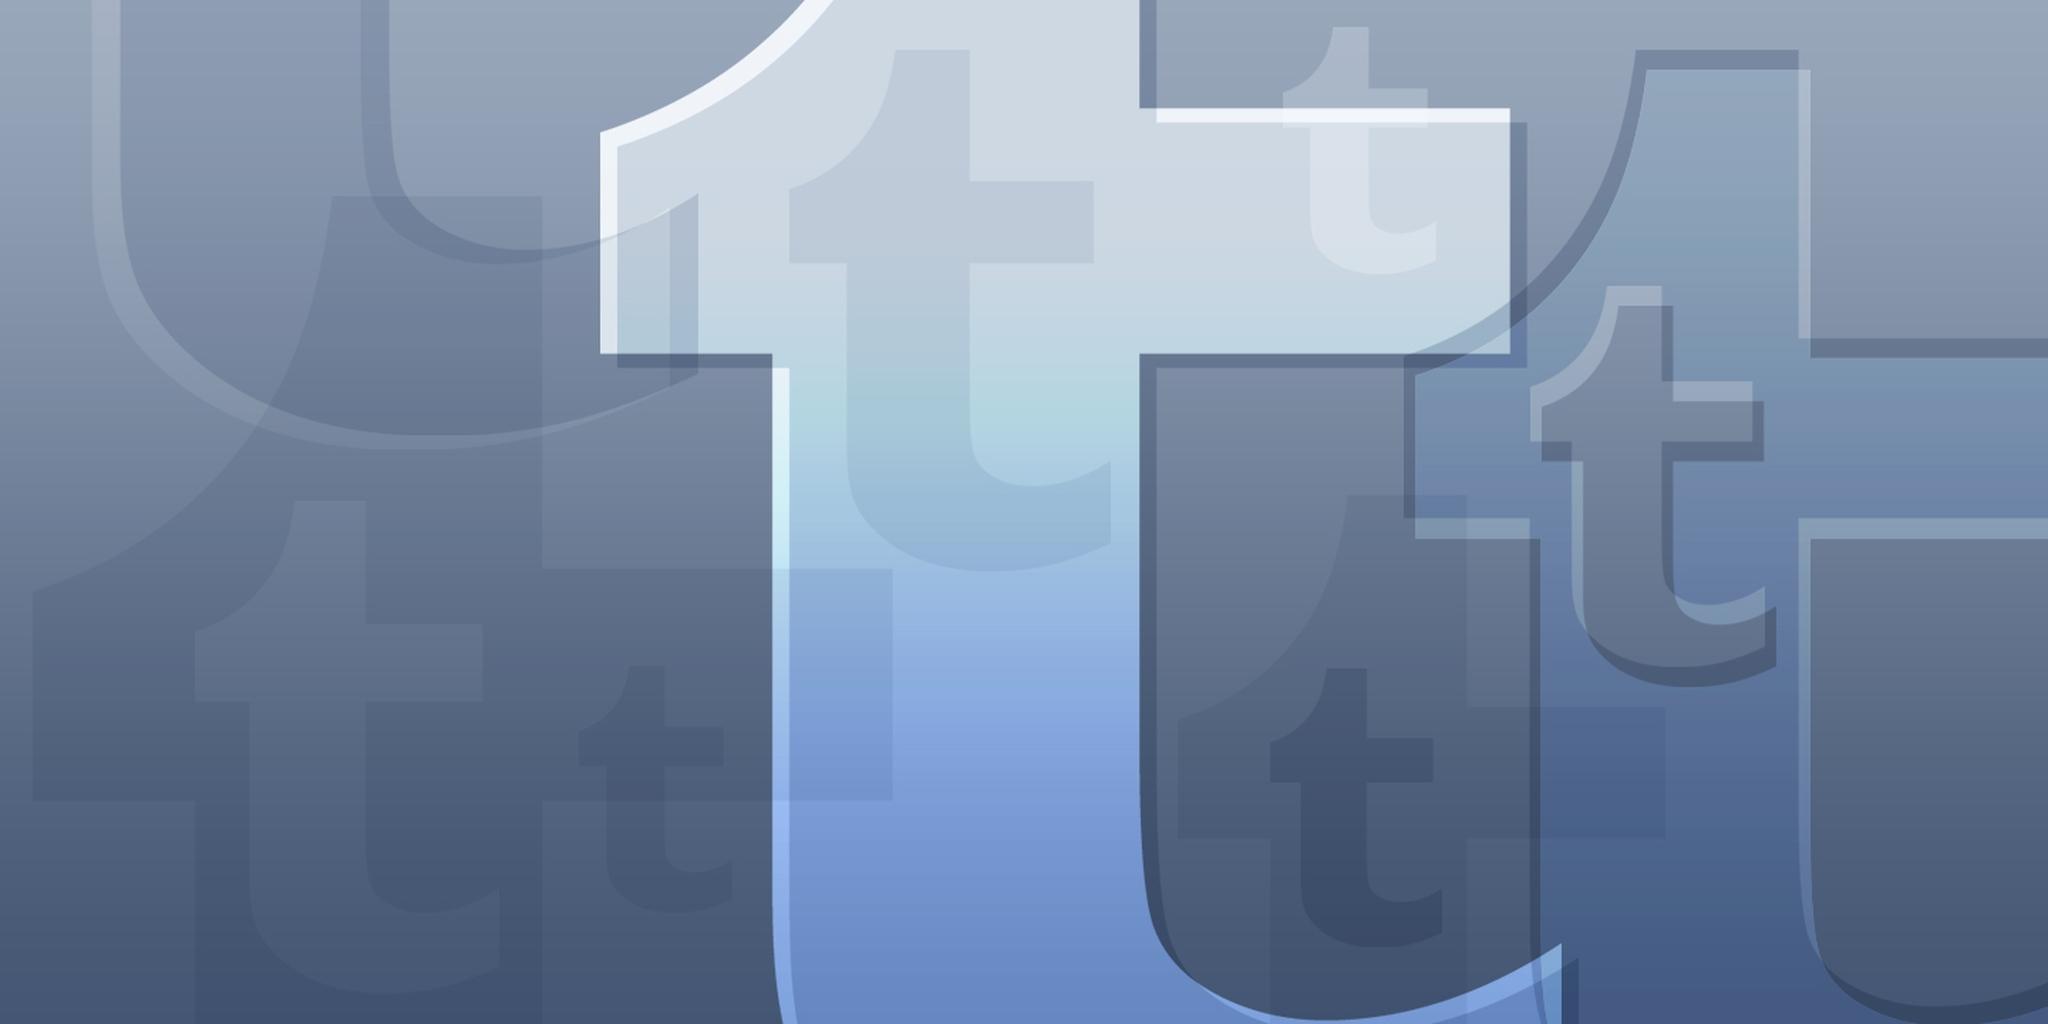 Tumblr T Logo - Behind the scenes of Tumblr's year in review | The Daily Dot